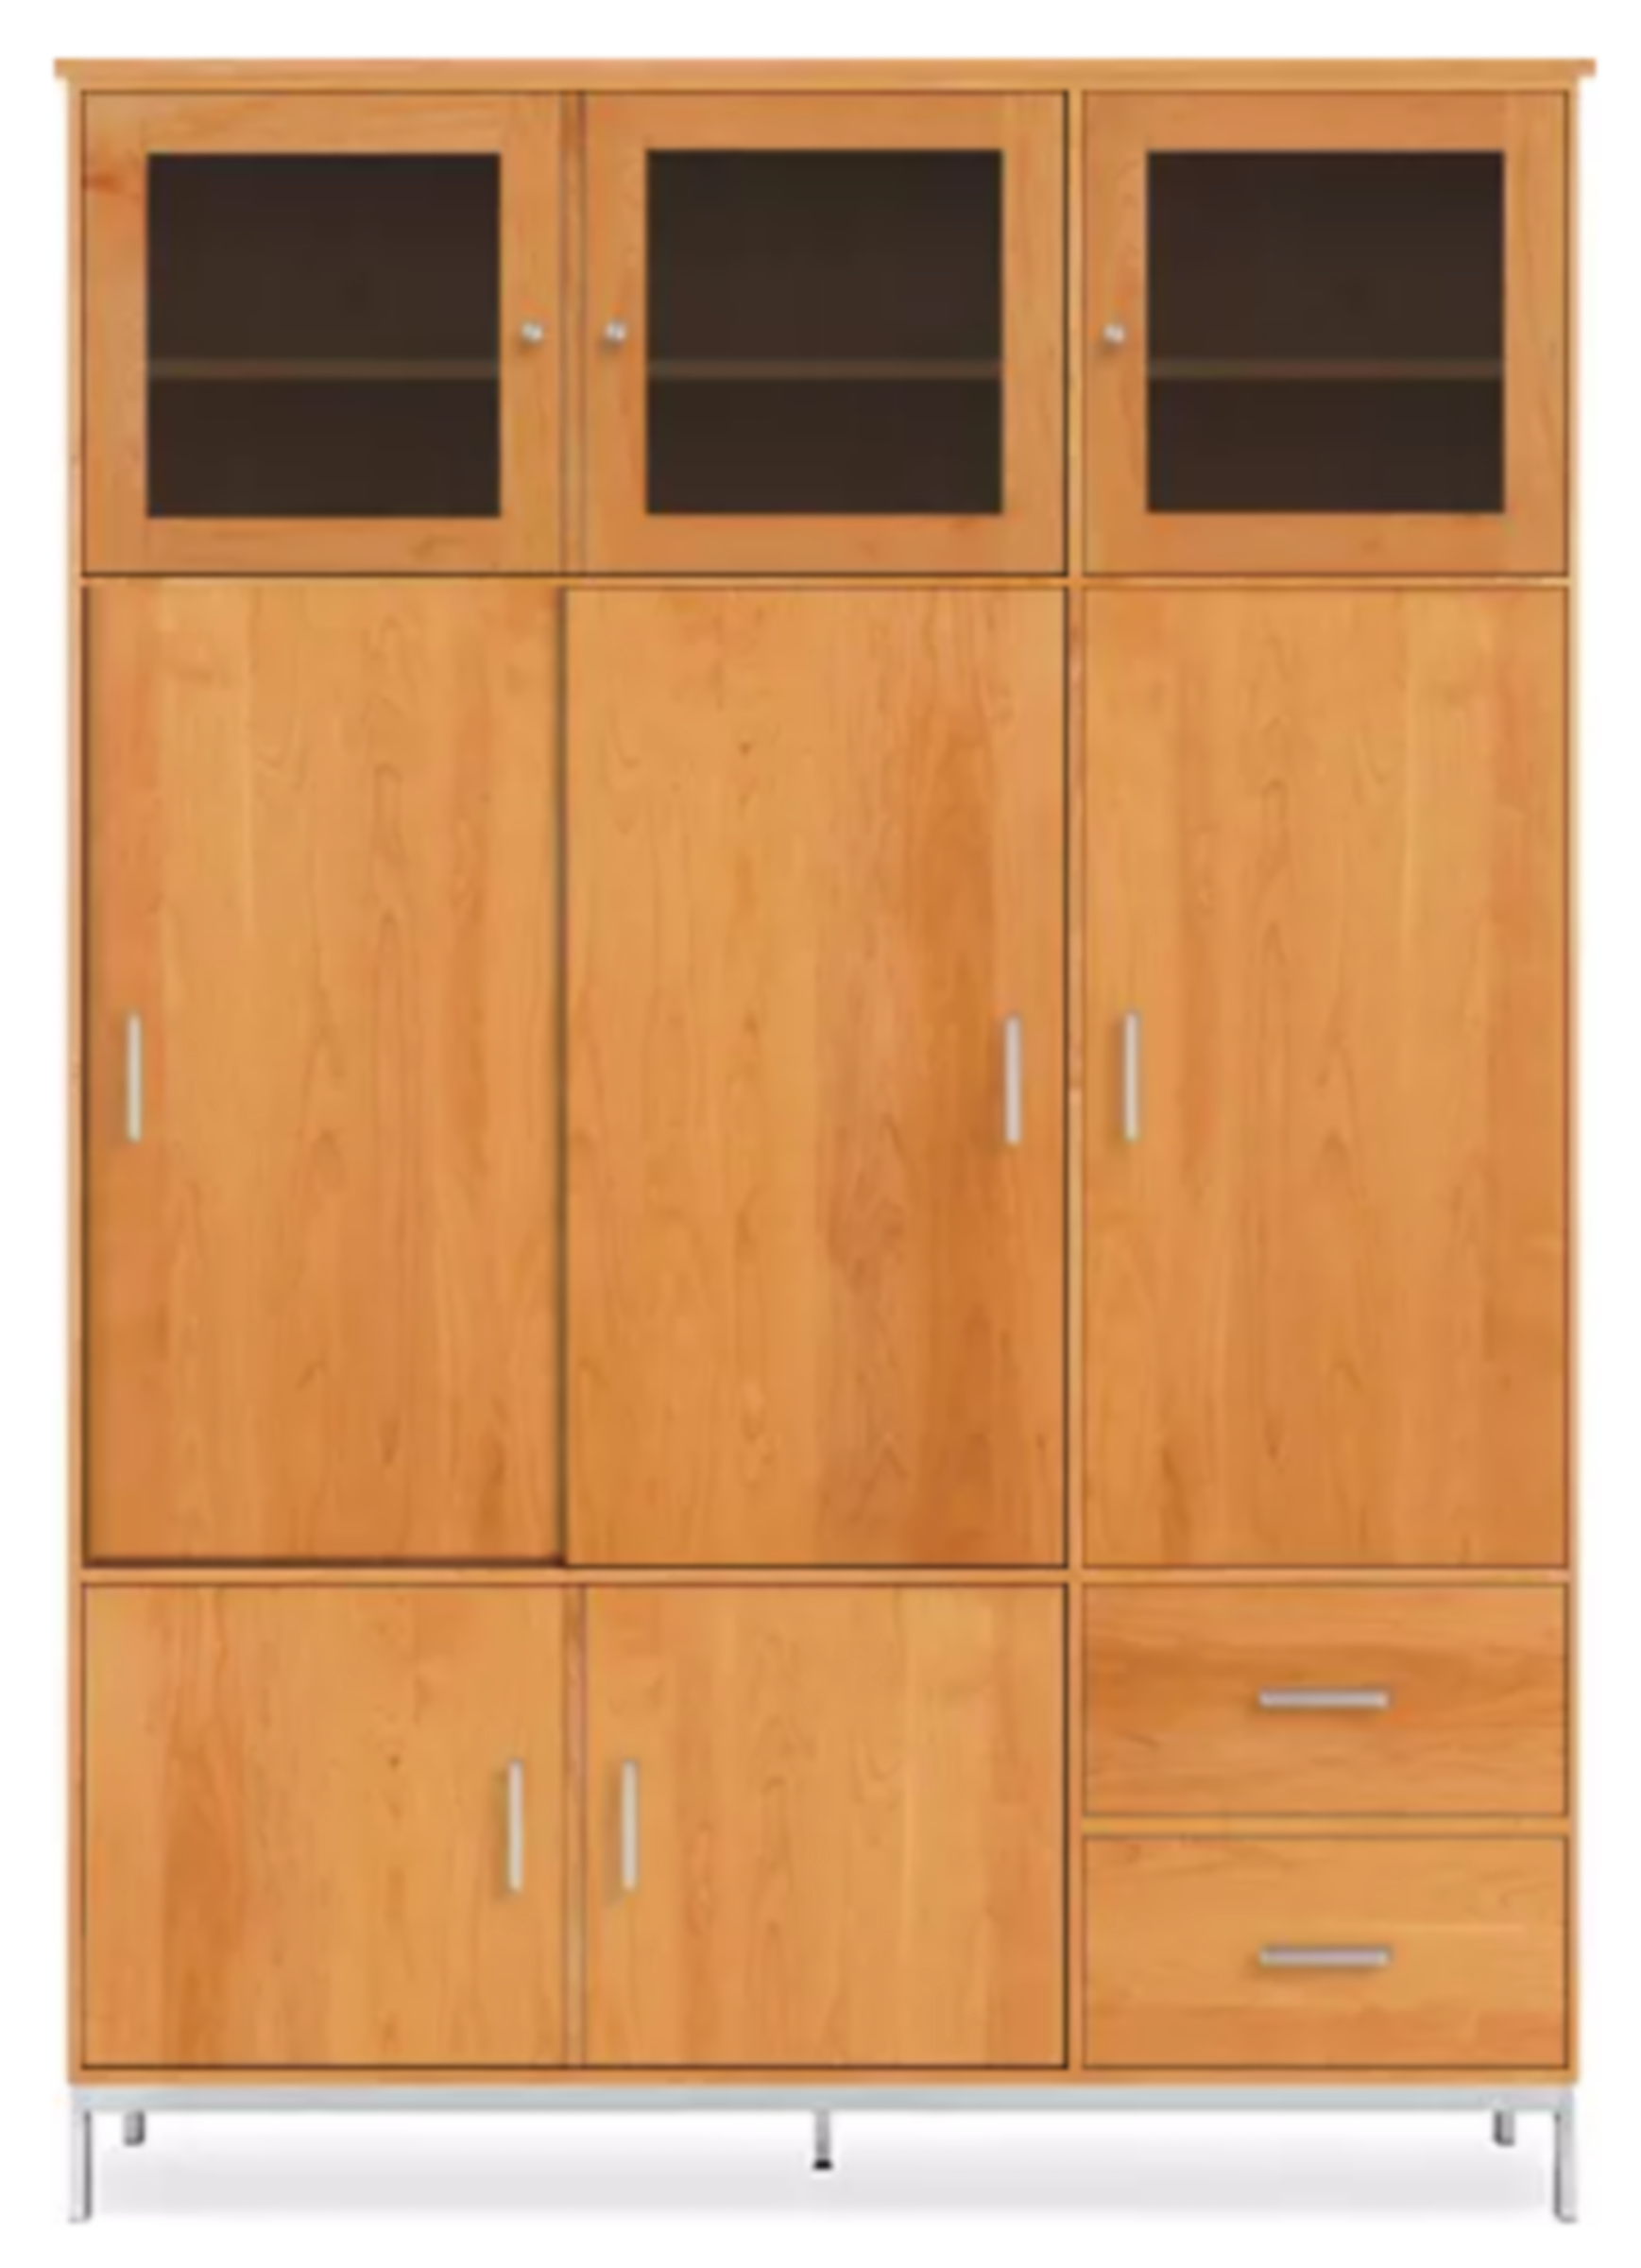 Linear 59w 25d 84h Cabinet in Cherry with Stainless Steel